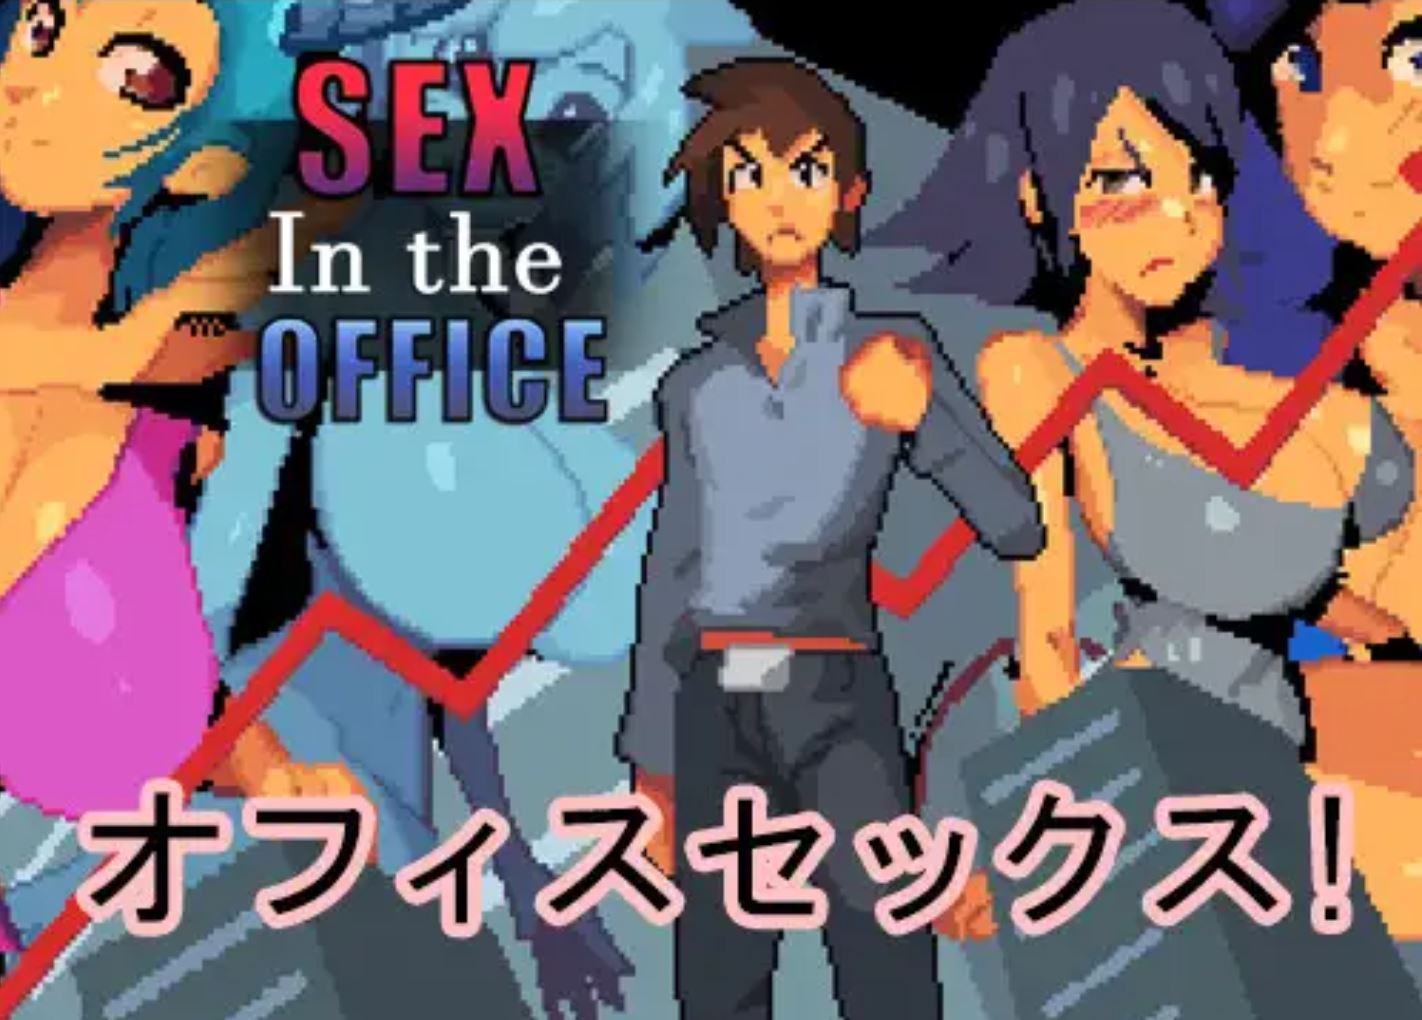 Office Adult Porn - Sex in the Office Others Porn Sex Game v.Final Download for Windows